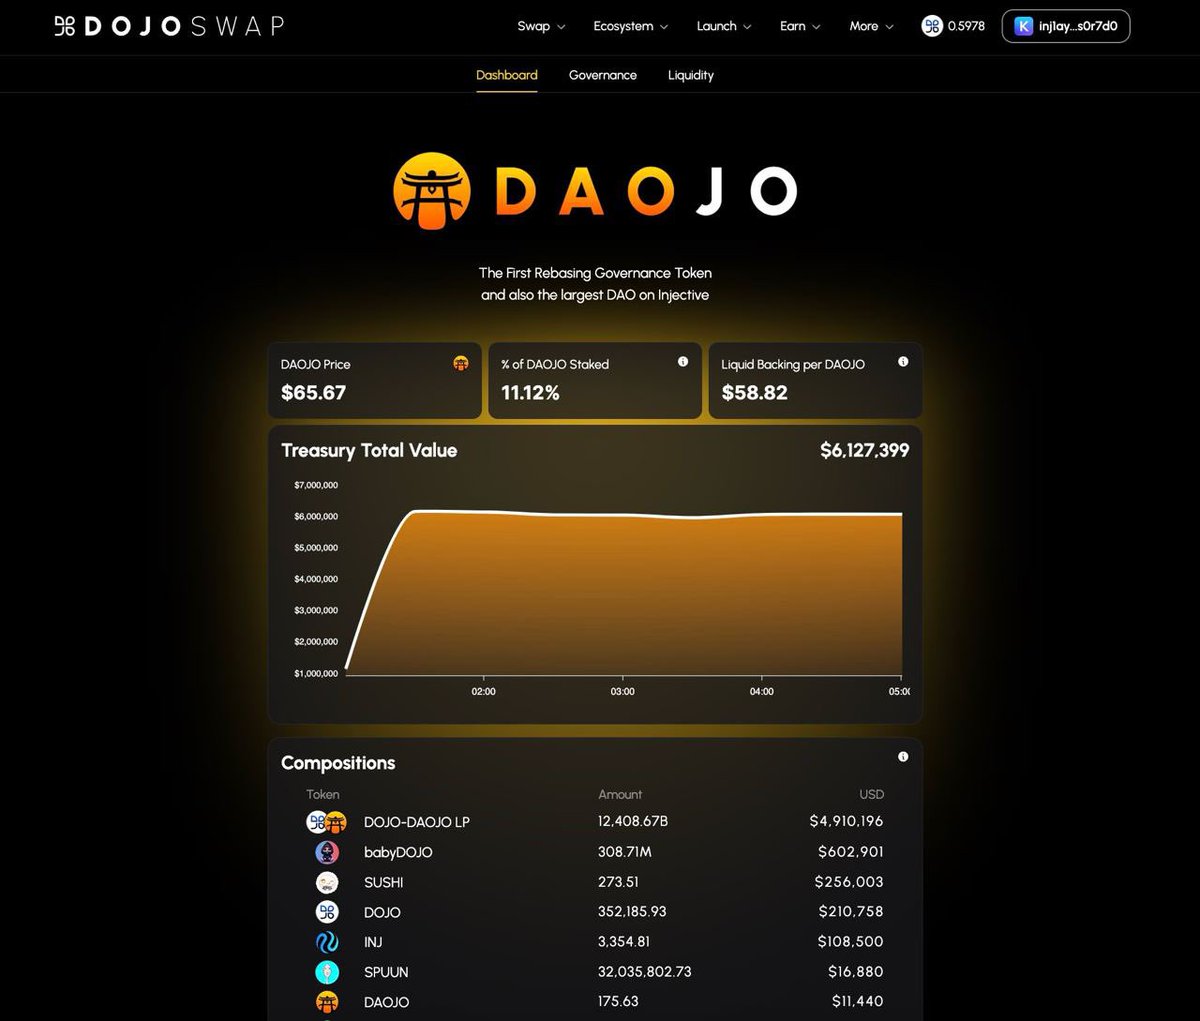 ⚔️ Dashboard will be up soon on DAOJO platform for users to track: 🔹Liquid Backing per DAOJO 🔹 Percentage of DAOJO staked 🔹 Real time price of DAOJO 🔹 Treasury Total Value over time 🔹 Assets Composition in Treasury